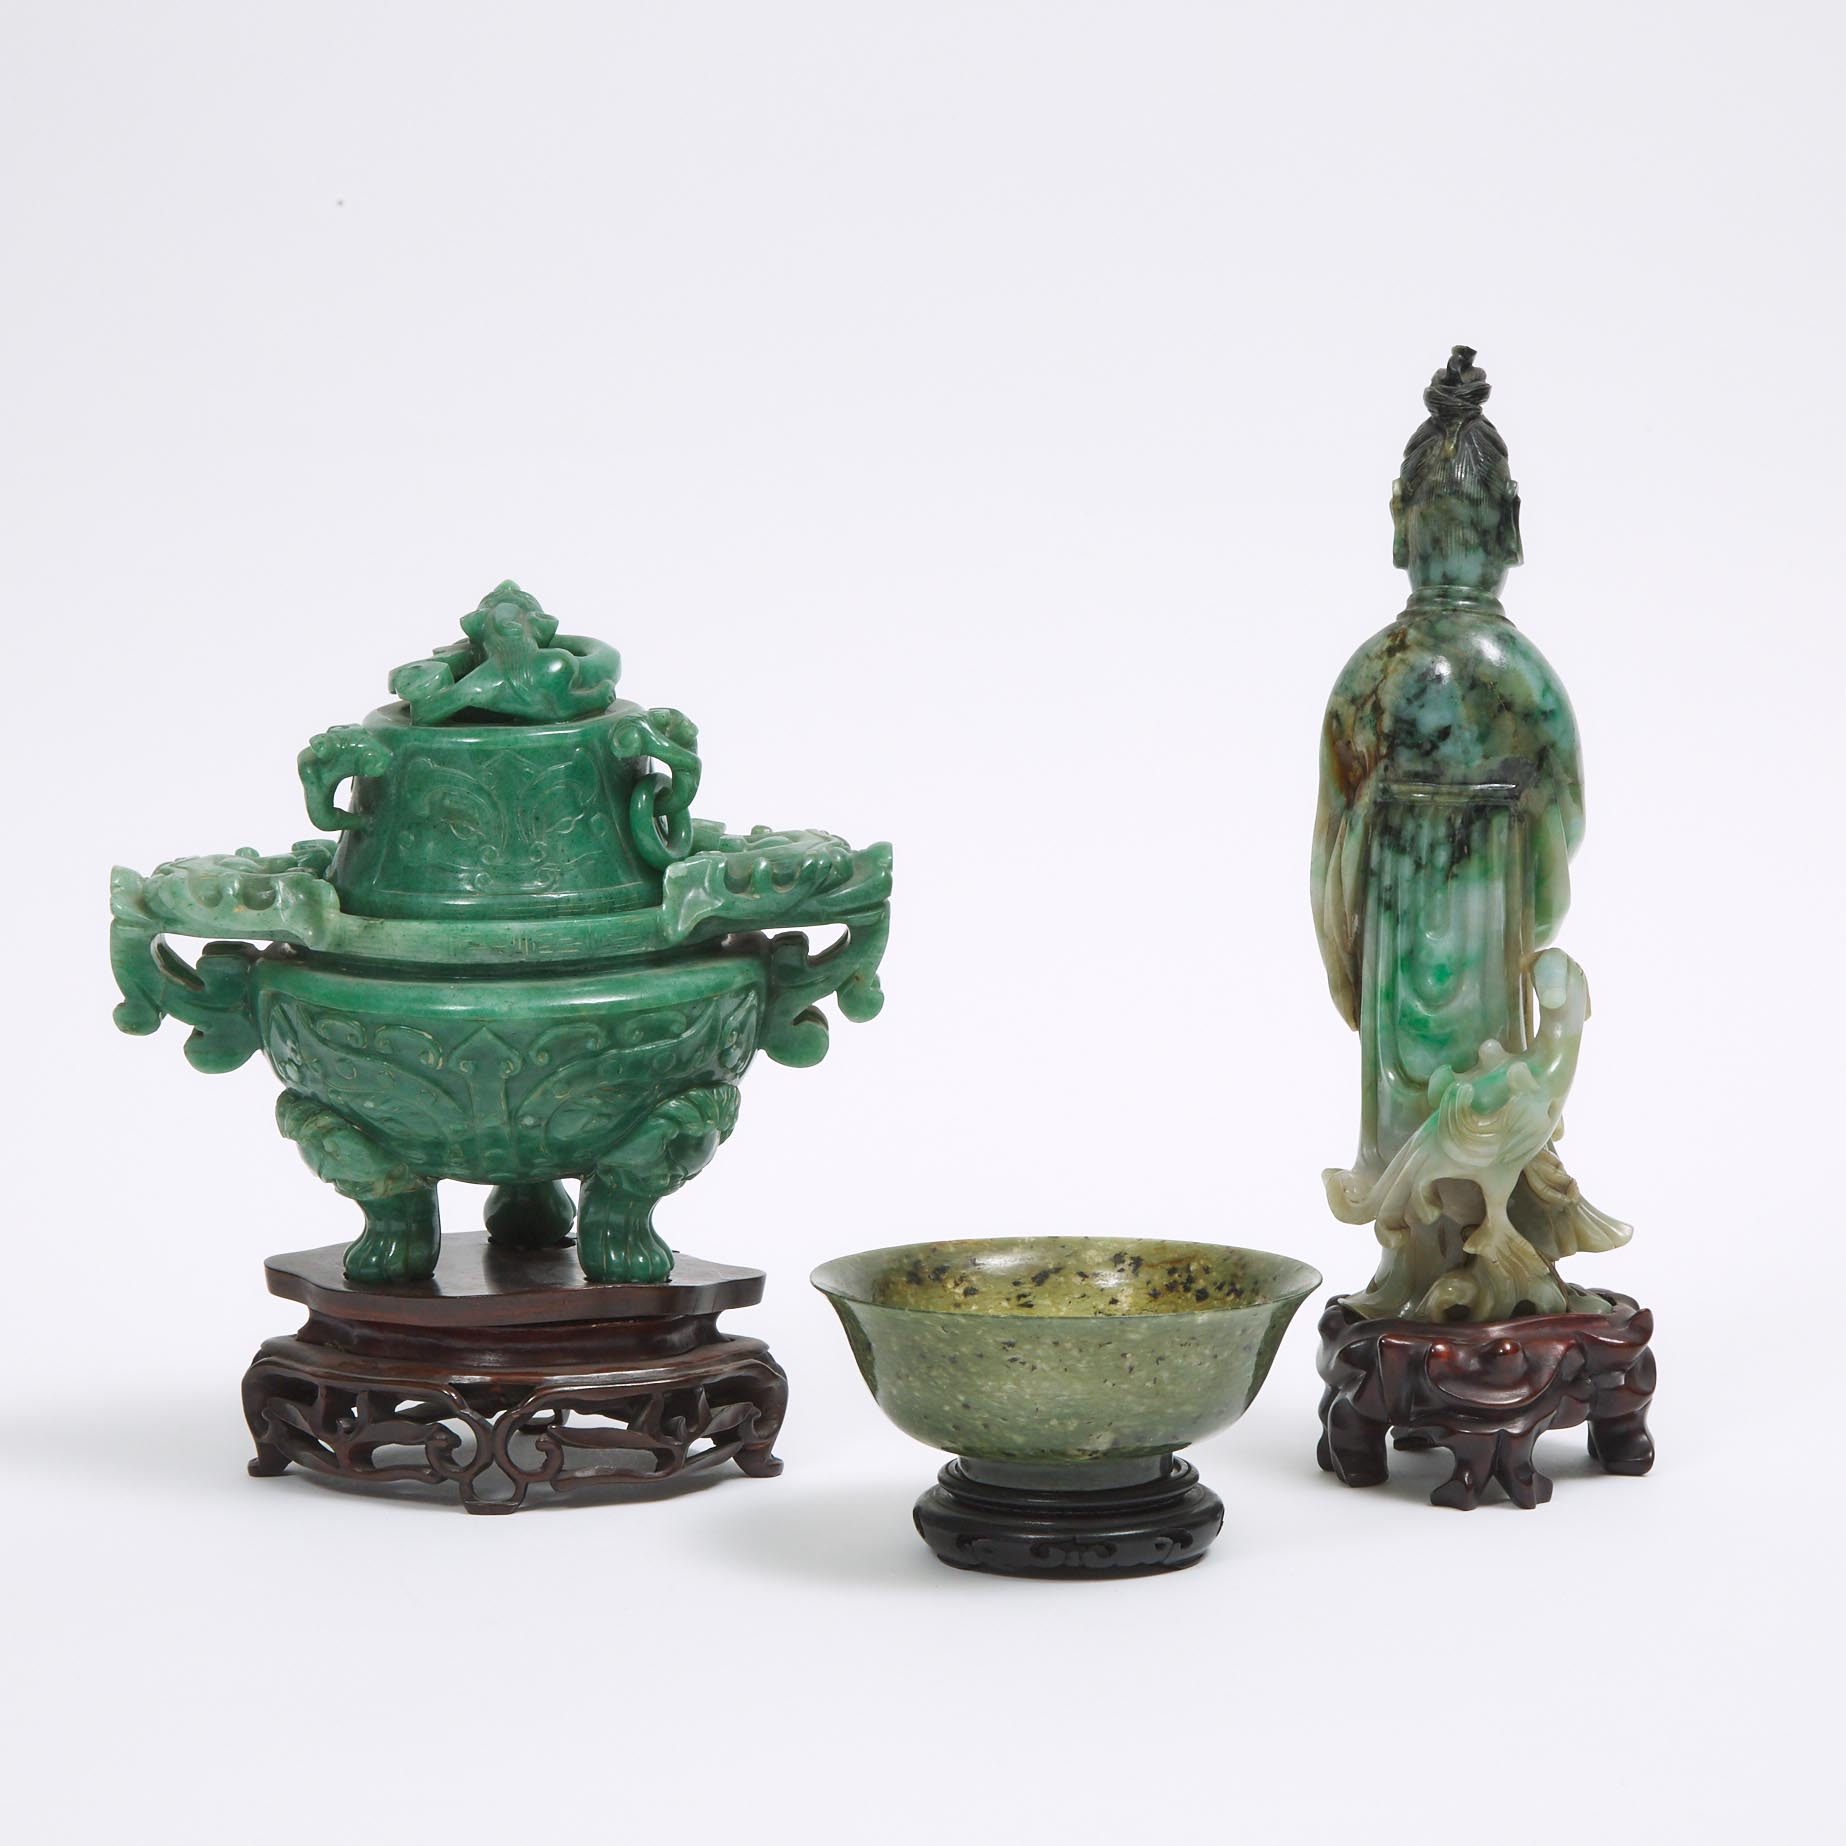 A Group of Three Jadeite and Hardstone Carvings